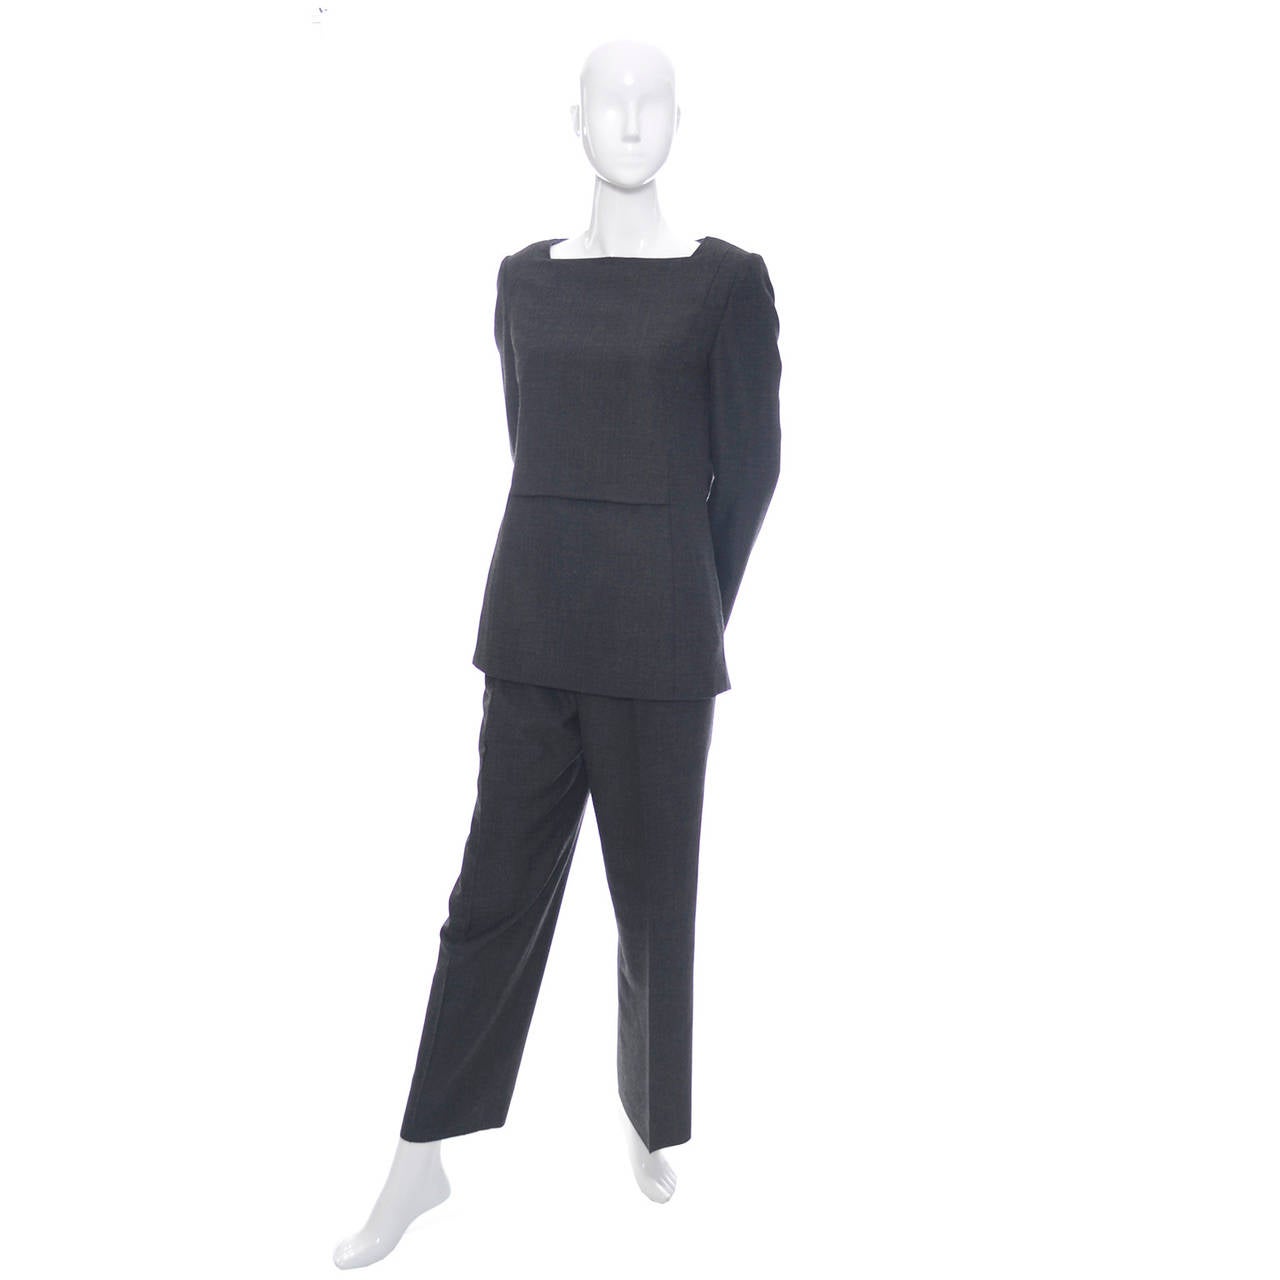 This is a classic lightweight gray wool 2 piece vintage pantsuit outfit from James Galanos. The top is a tunic with long sleeves and front pockets and the pants have side slit pockets and a side zipper. This outfit is lined and is in excellent